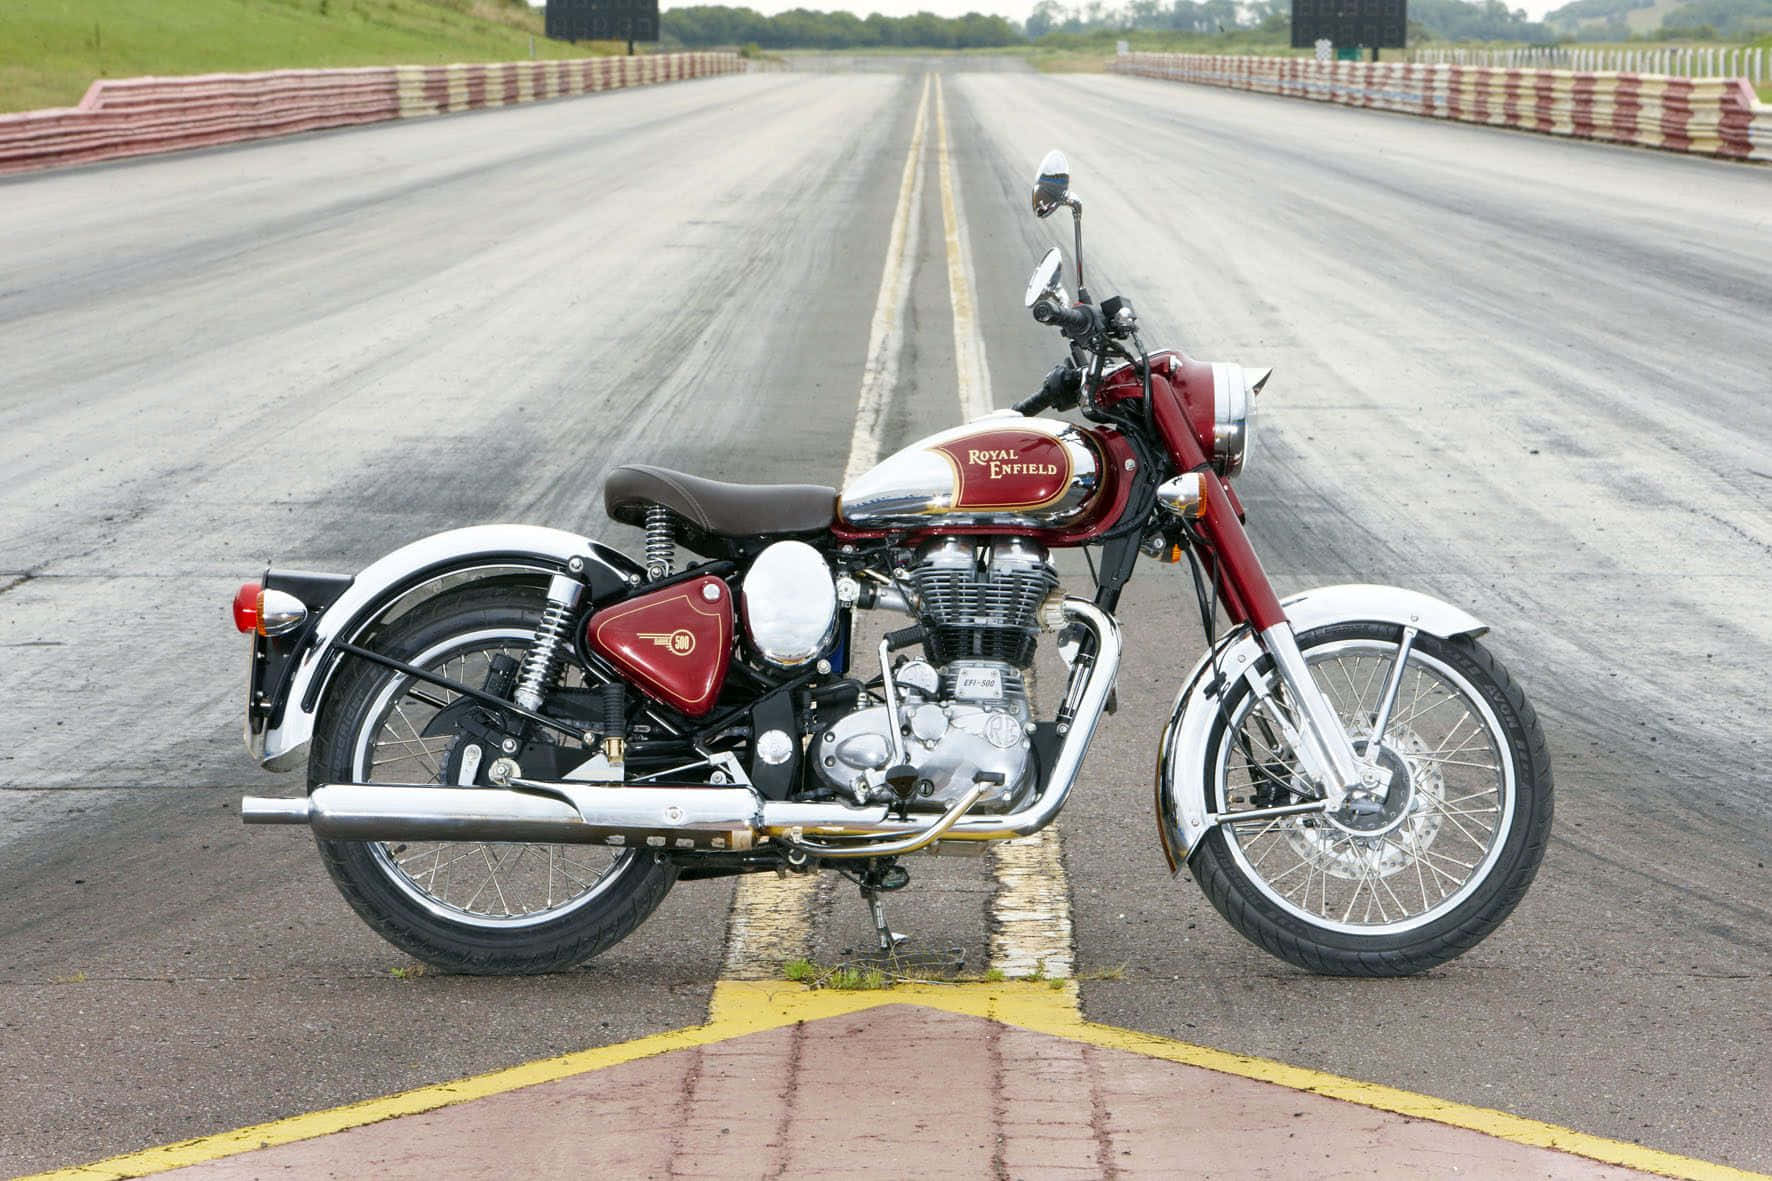 Cruising in style with a Royal Enfield Bullet